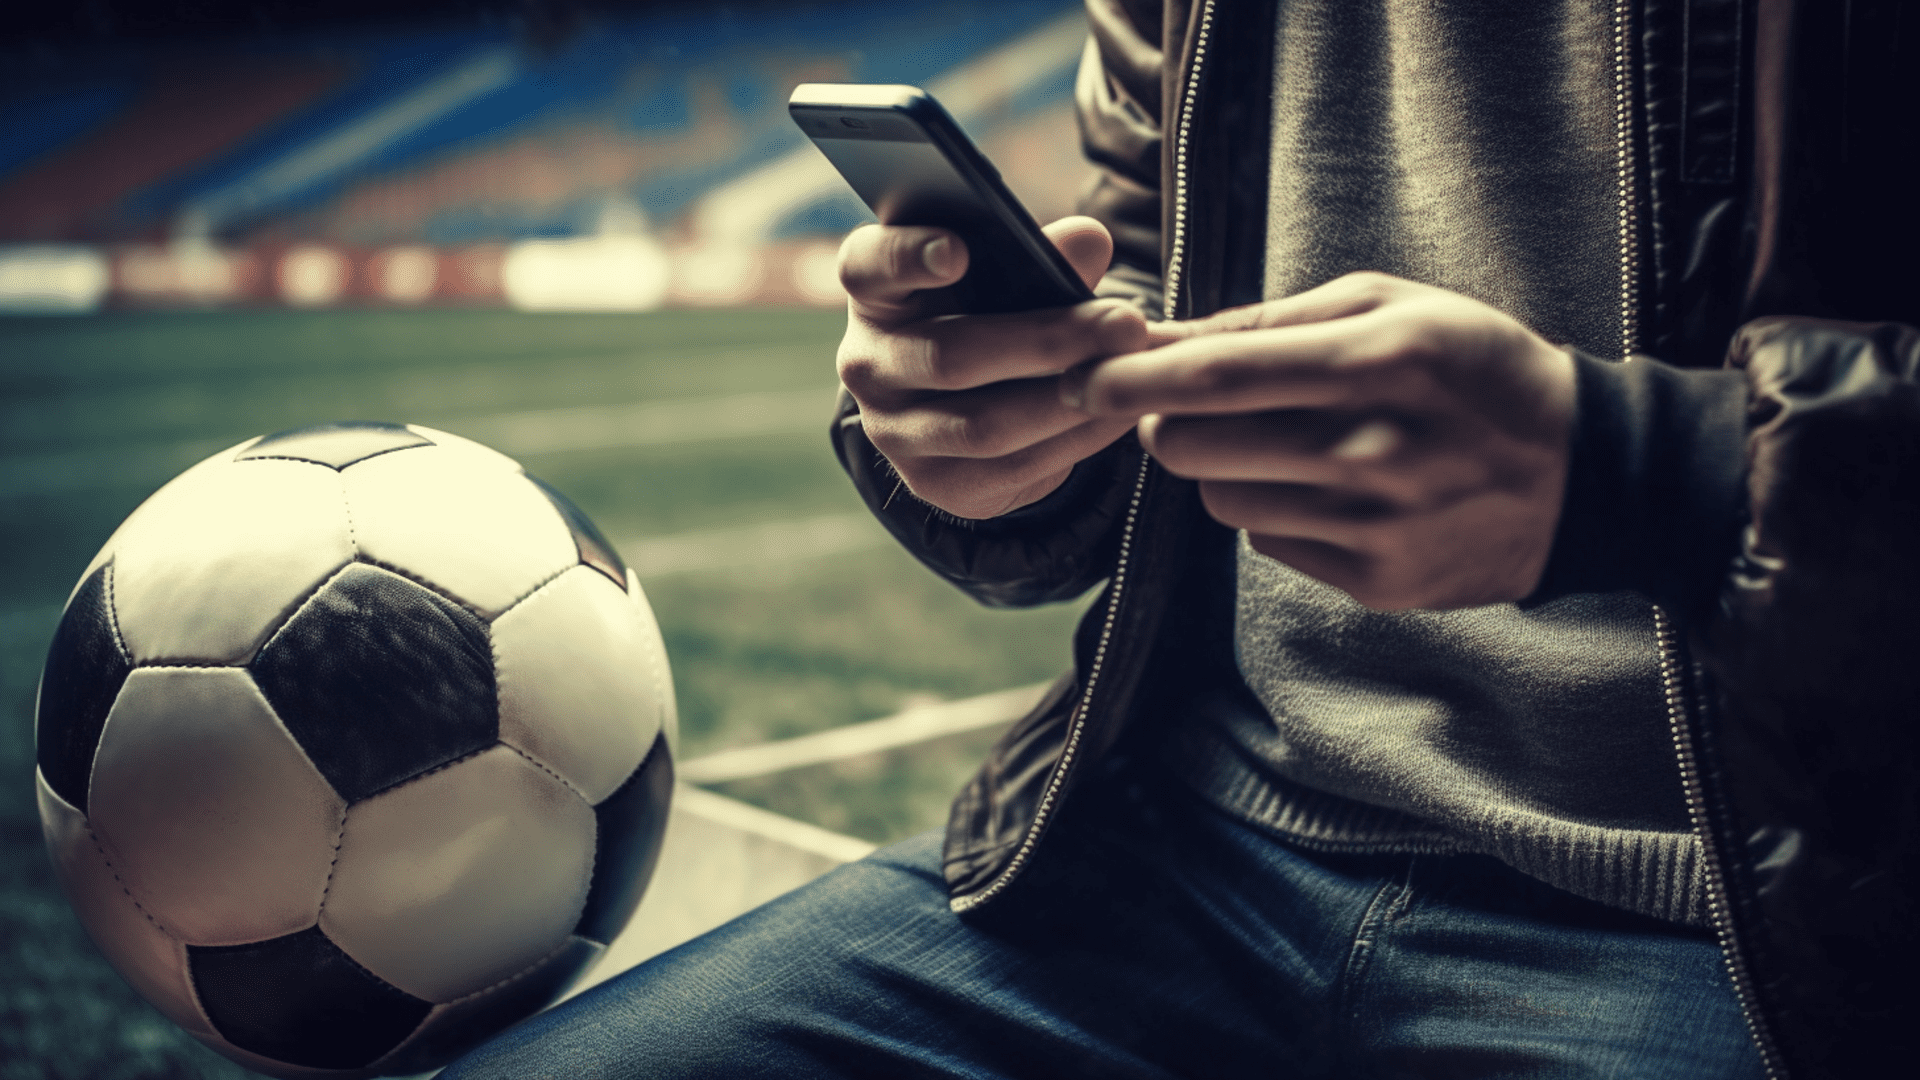 Top 10 Mobile Apps Every Soccer Fan Needs for Betting